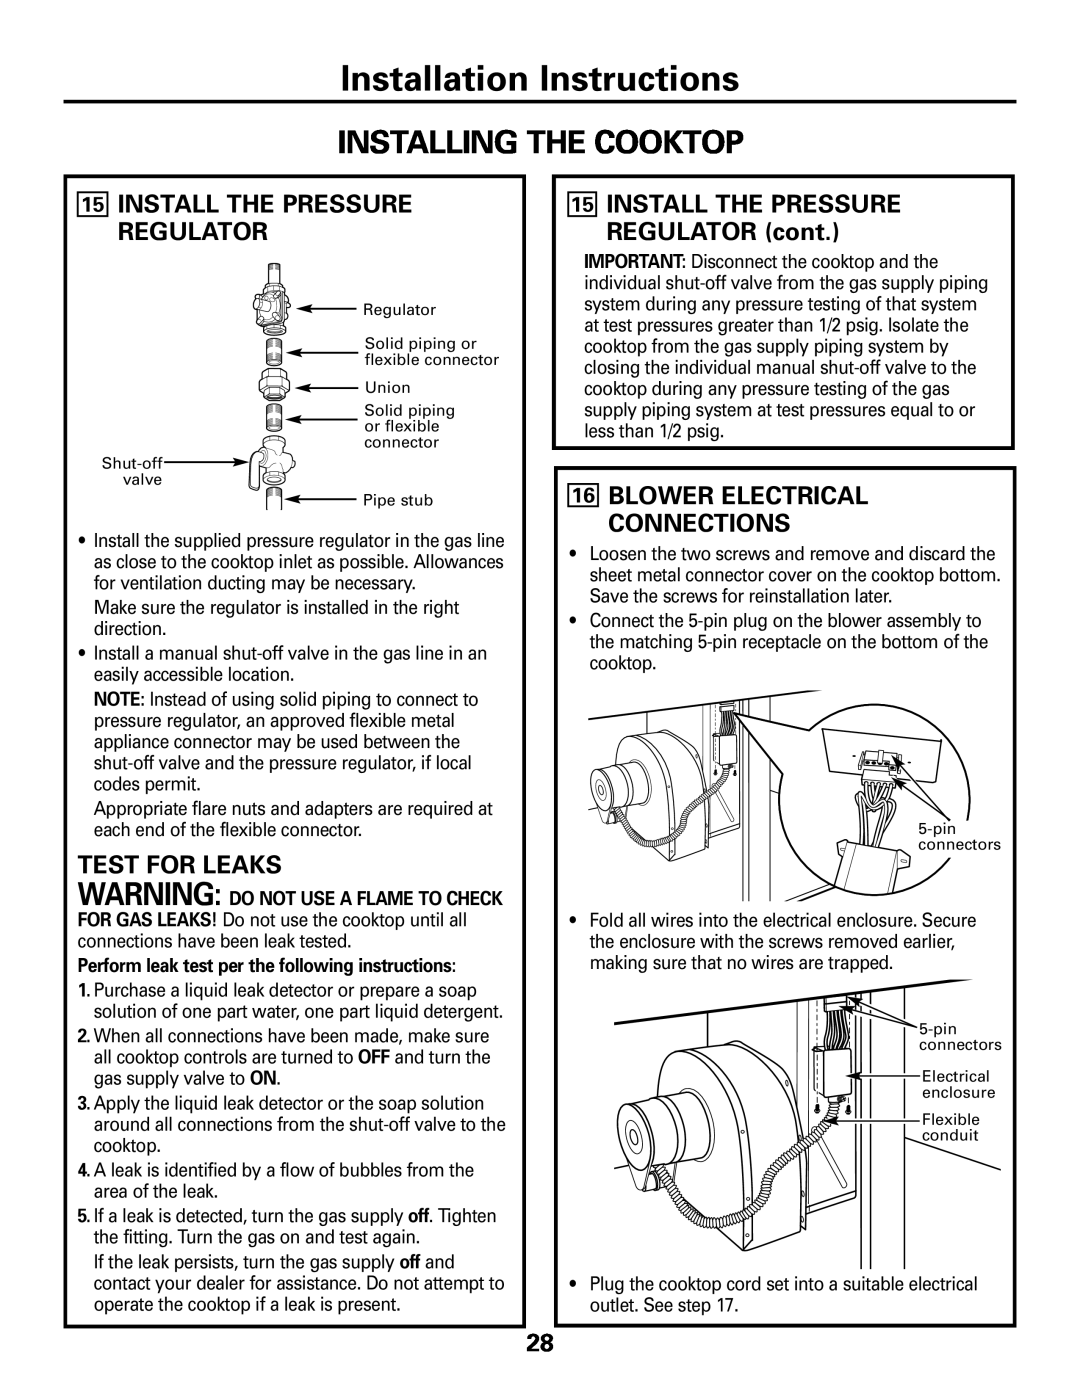 GE JGP989 manual Installation Instructions, Installing The Cooktop, 15INSTALL THE PRESSURE REGULATOR, 16BLOWER ELECTRICAL 